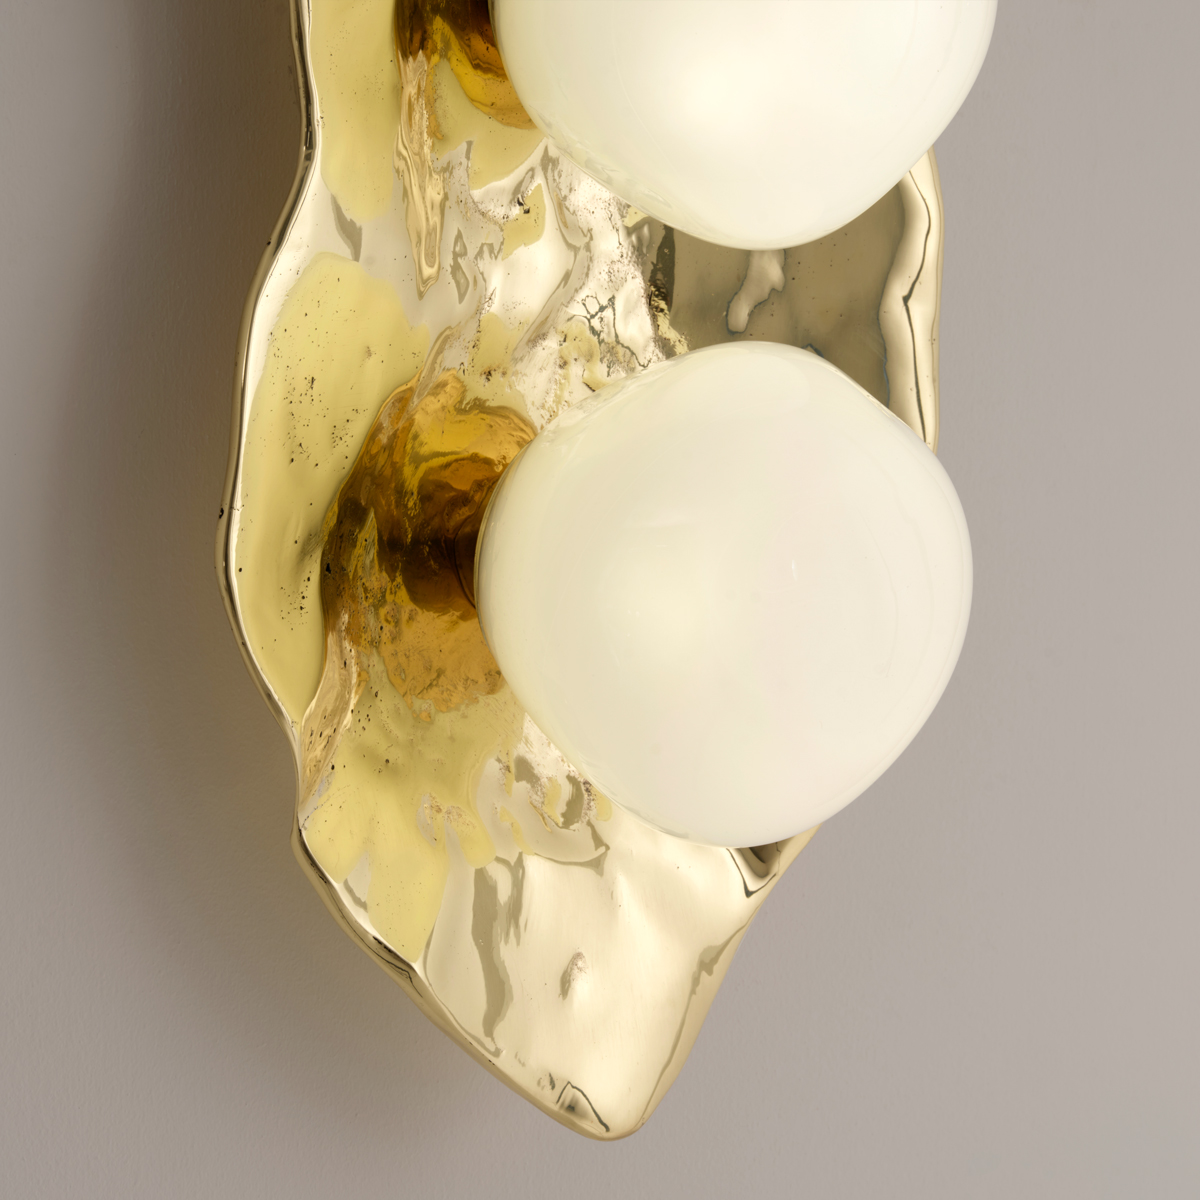 Shell Wall light by Gaspare Asaro